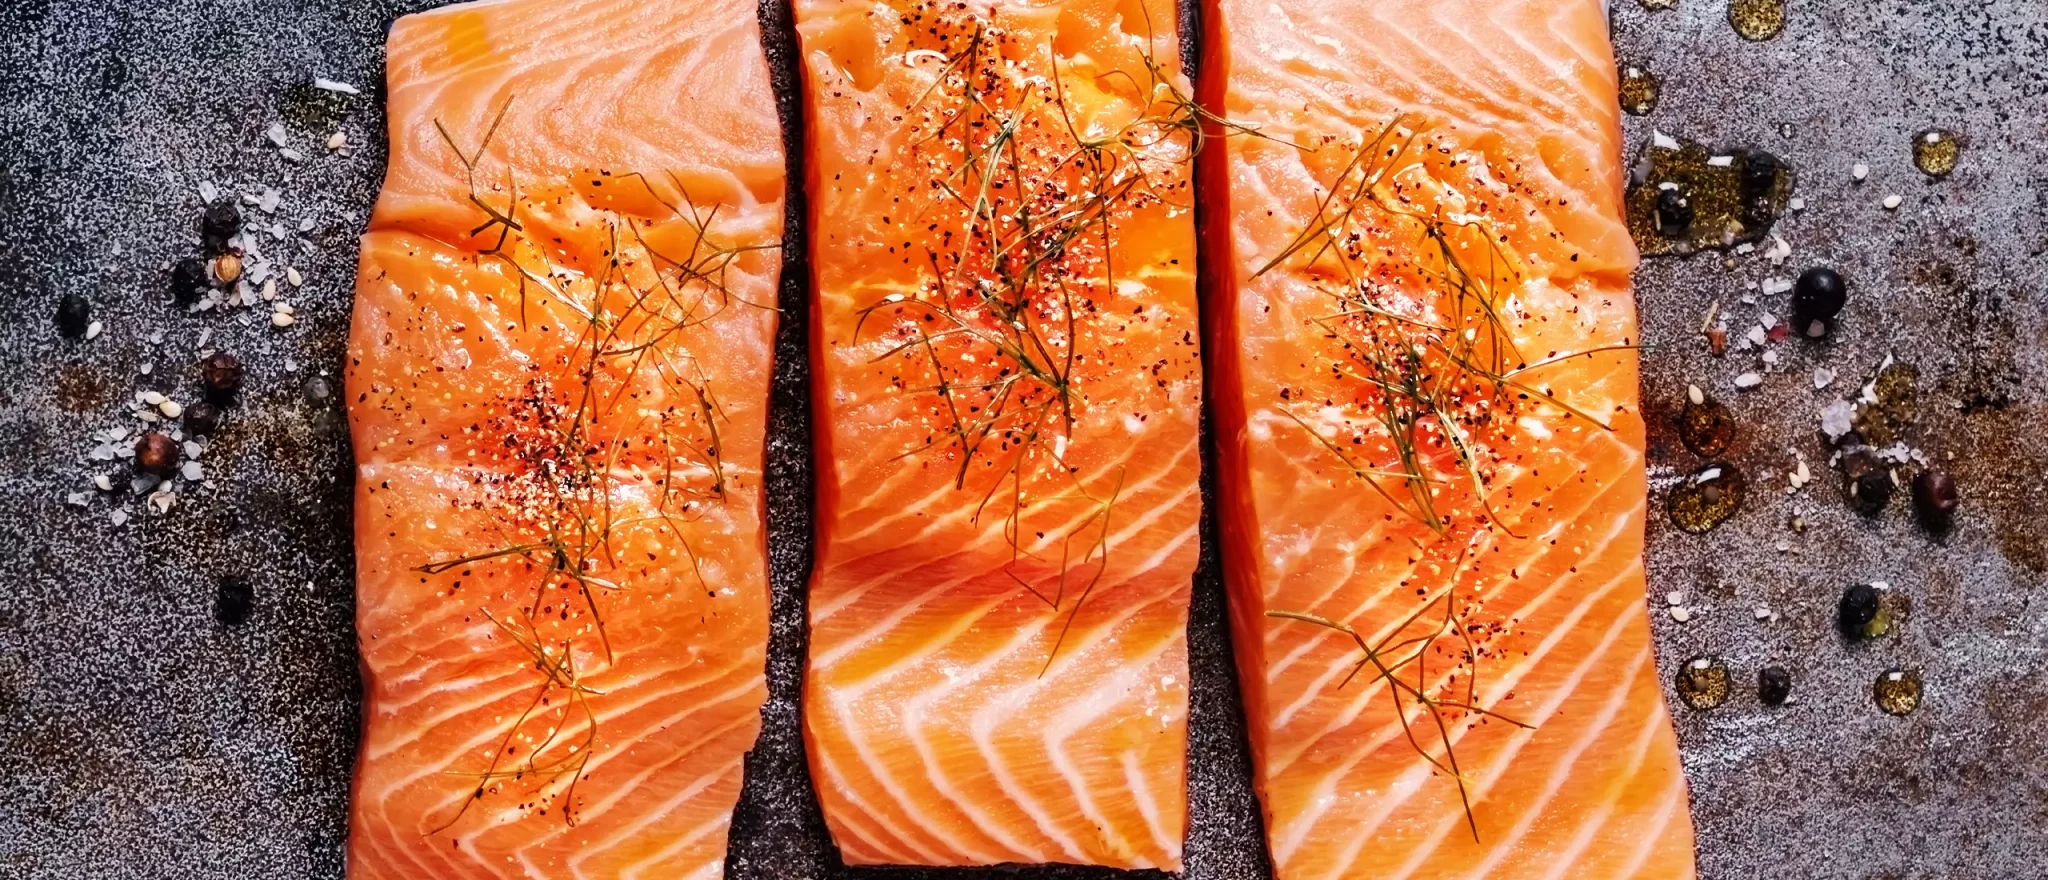 This Is Your Body On a Lack of Omega-3s